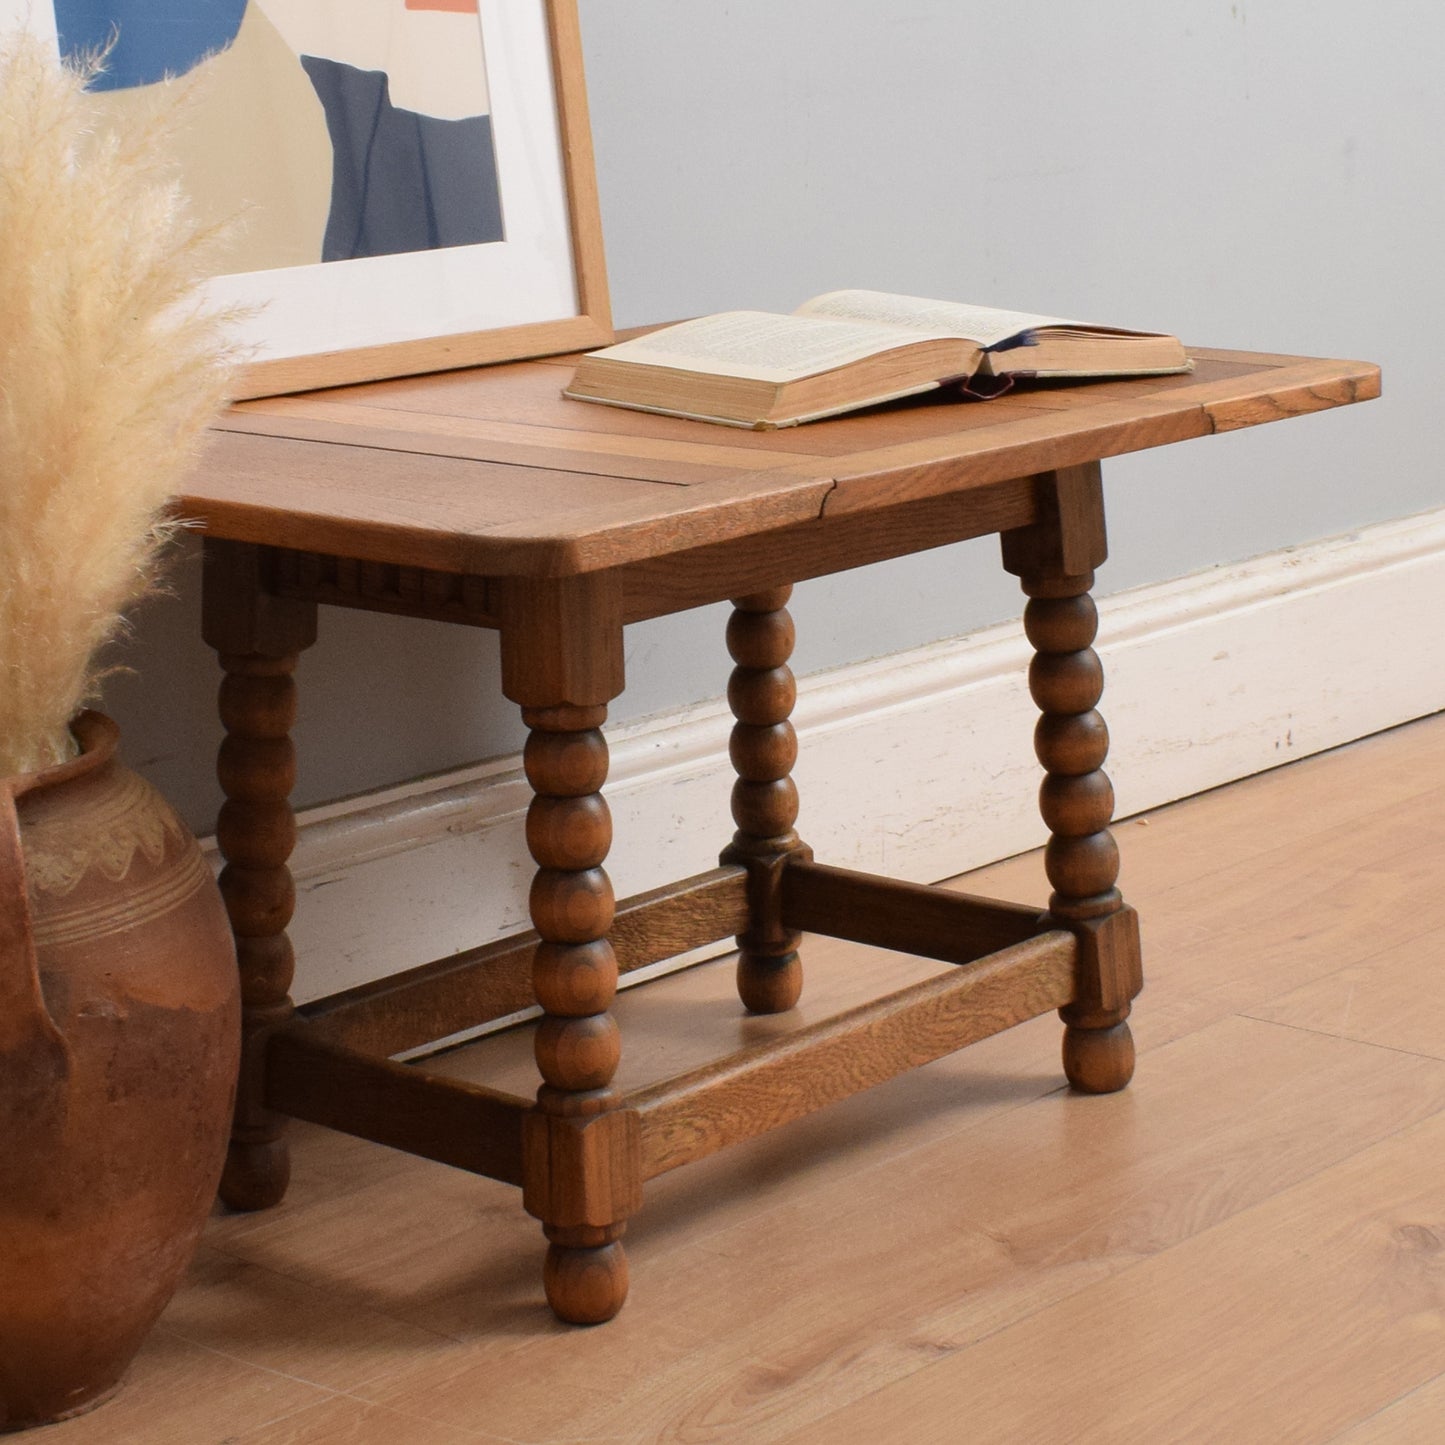 Small Restored Drop-Leaf Table